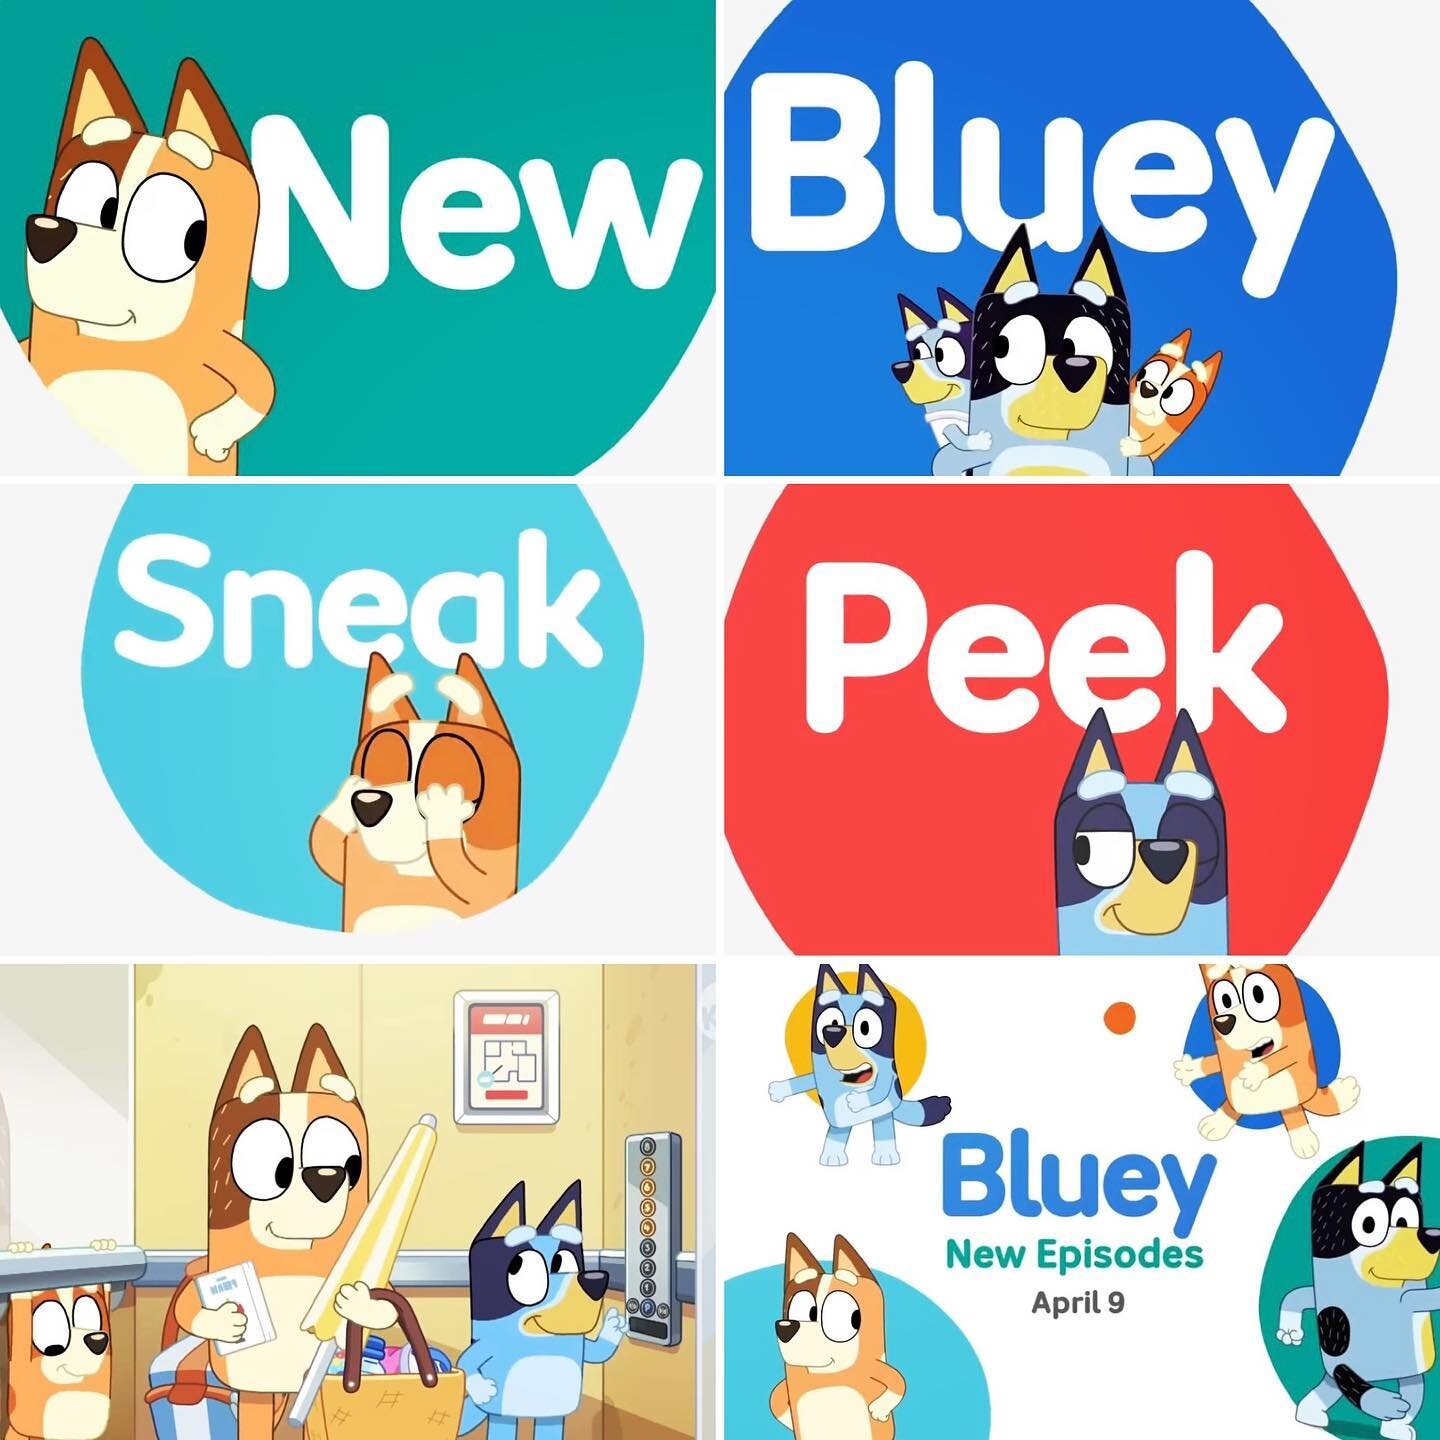 This looks like it could be the big announcement coming!
Shared the video on Facebook but can&rsquo;t seem to get it over to Insta so here are some screen shots!
New episodes&hellip;. April 9!!!
.
.
@officialblueytv #Bluey #blueyrecaps #heelerfamily 